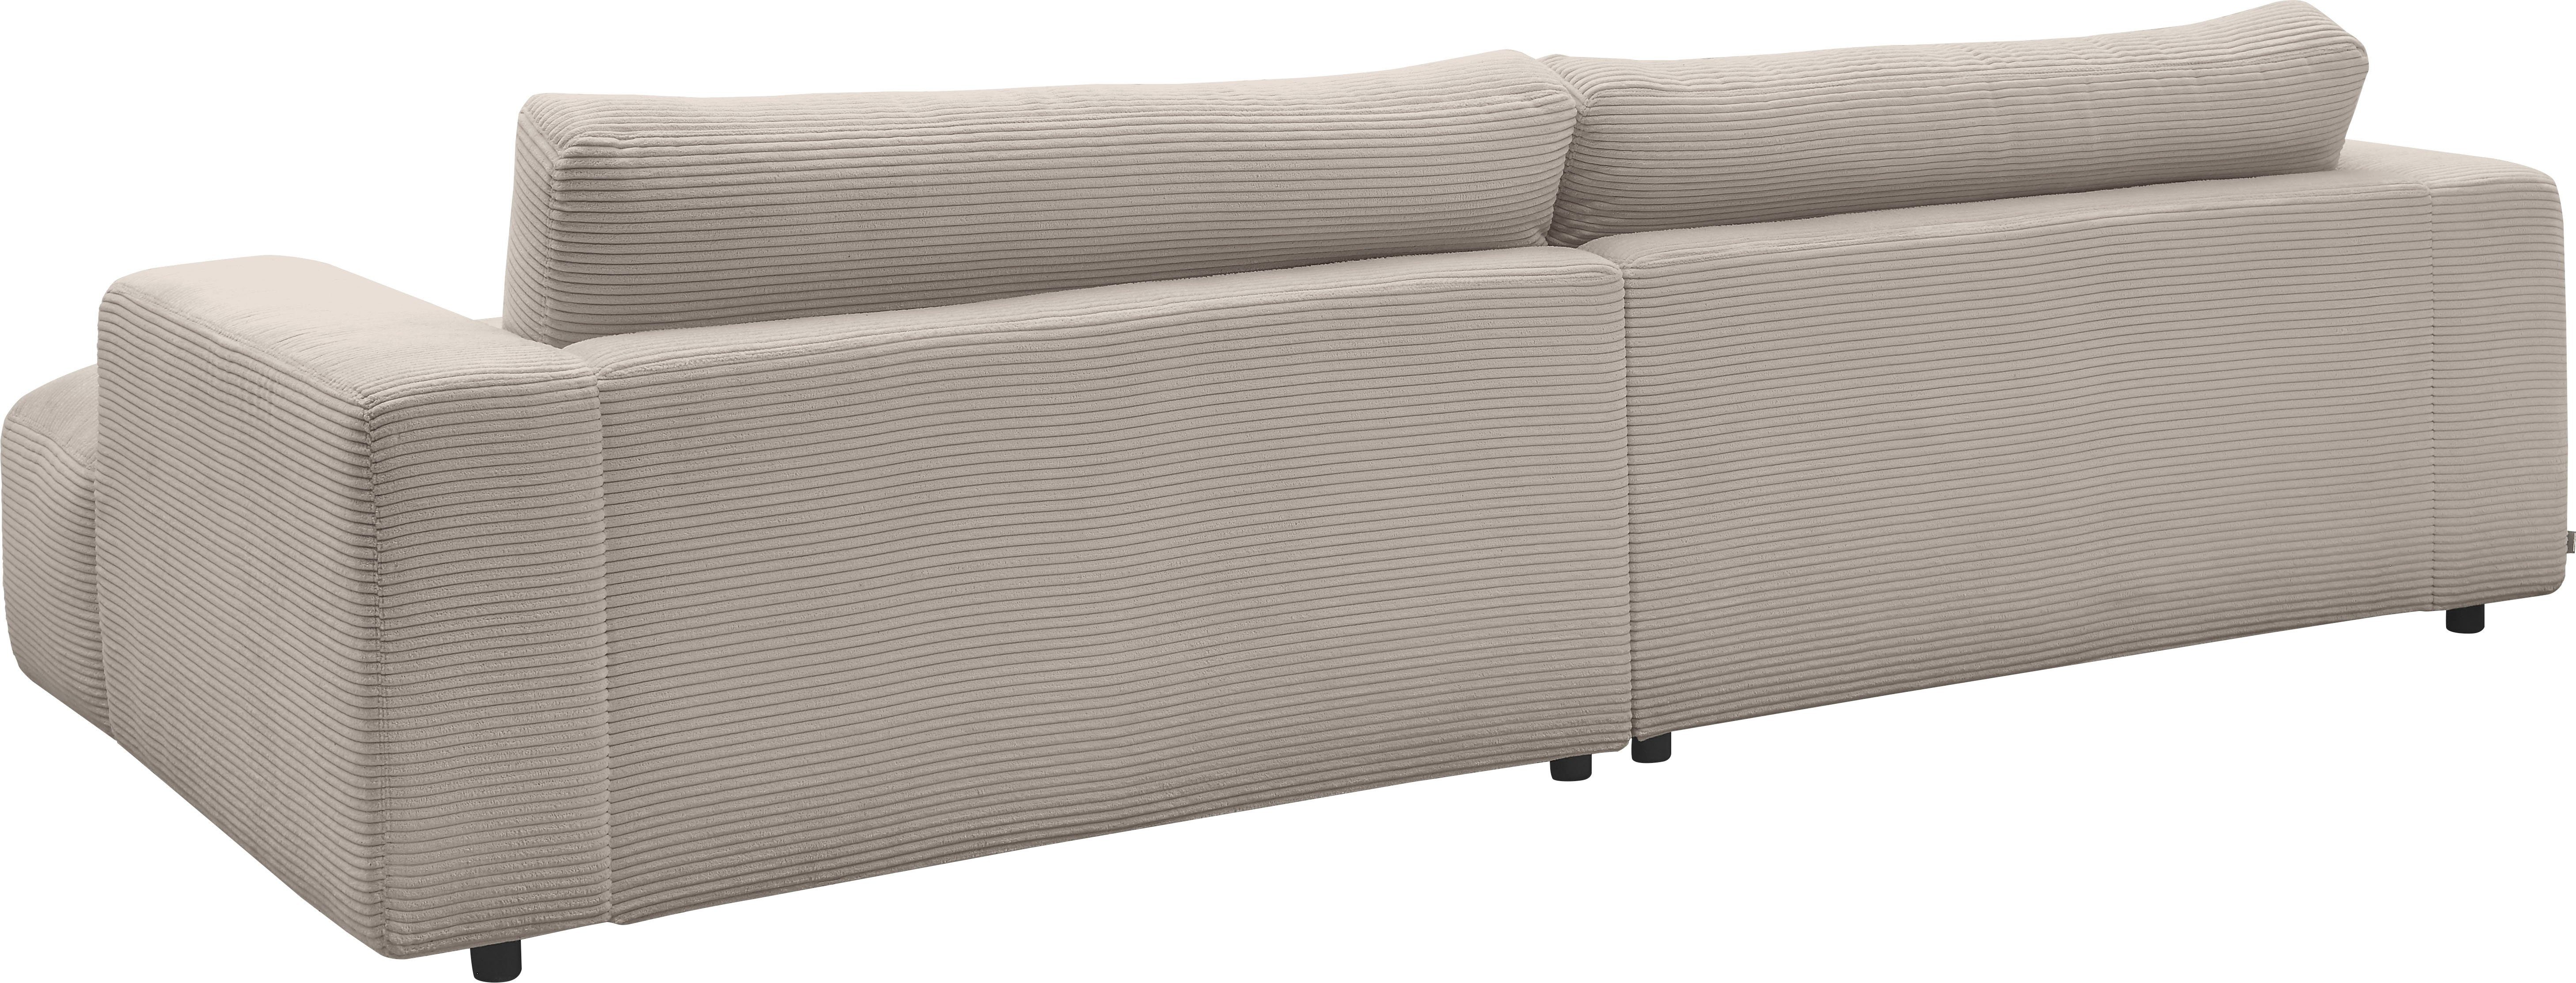 by M light-grey Musterring Lucia, GALLERY Breite Cord-Bezug, cm Loungesofa 292 branded